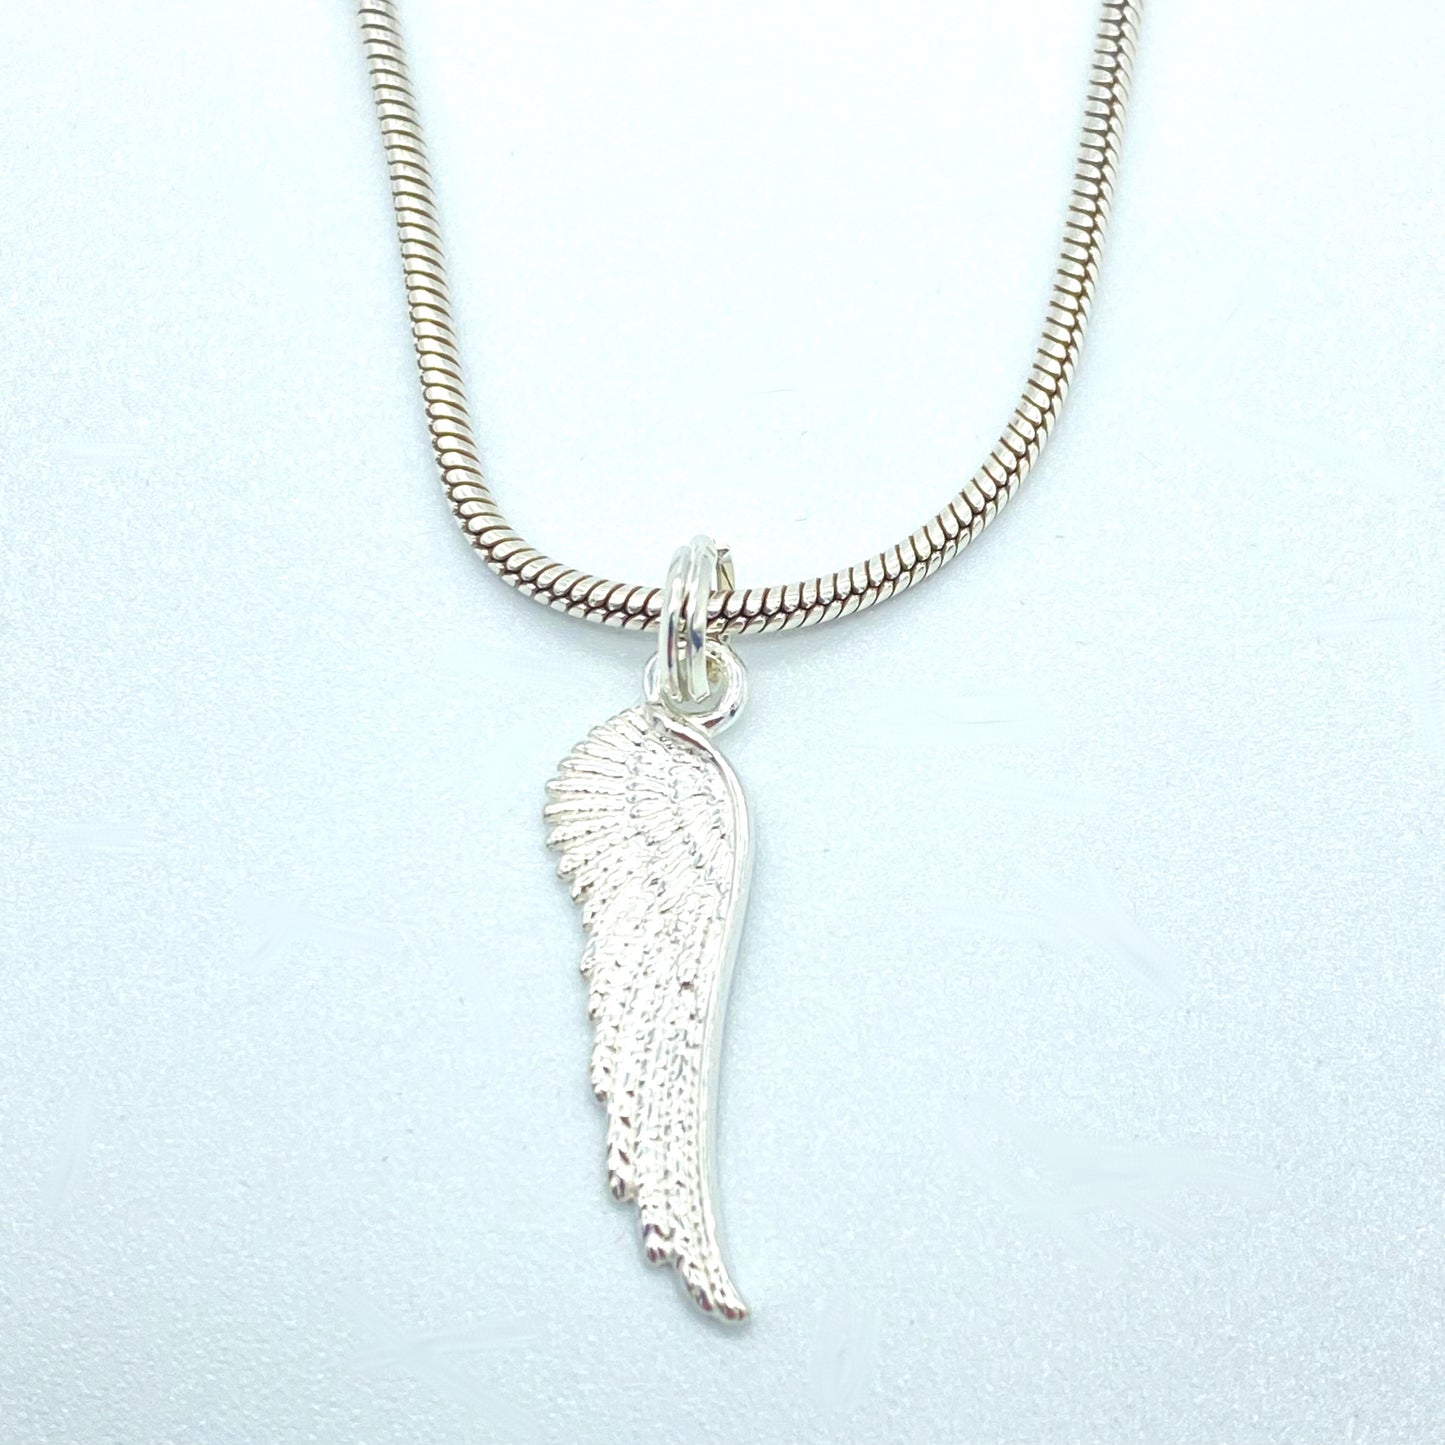 Sterling Silver Necklace with Angel Wing Pendant by My Silver Wish